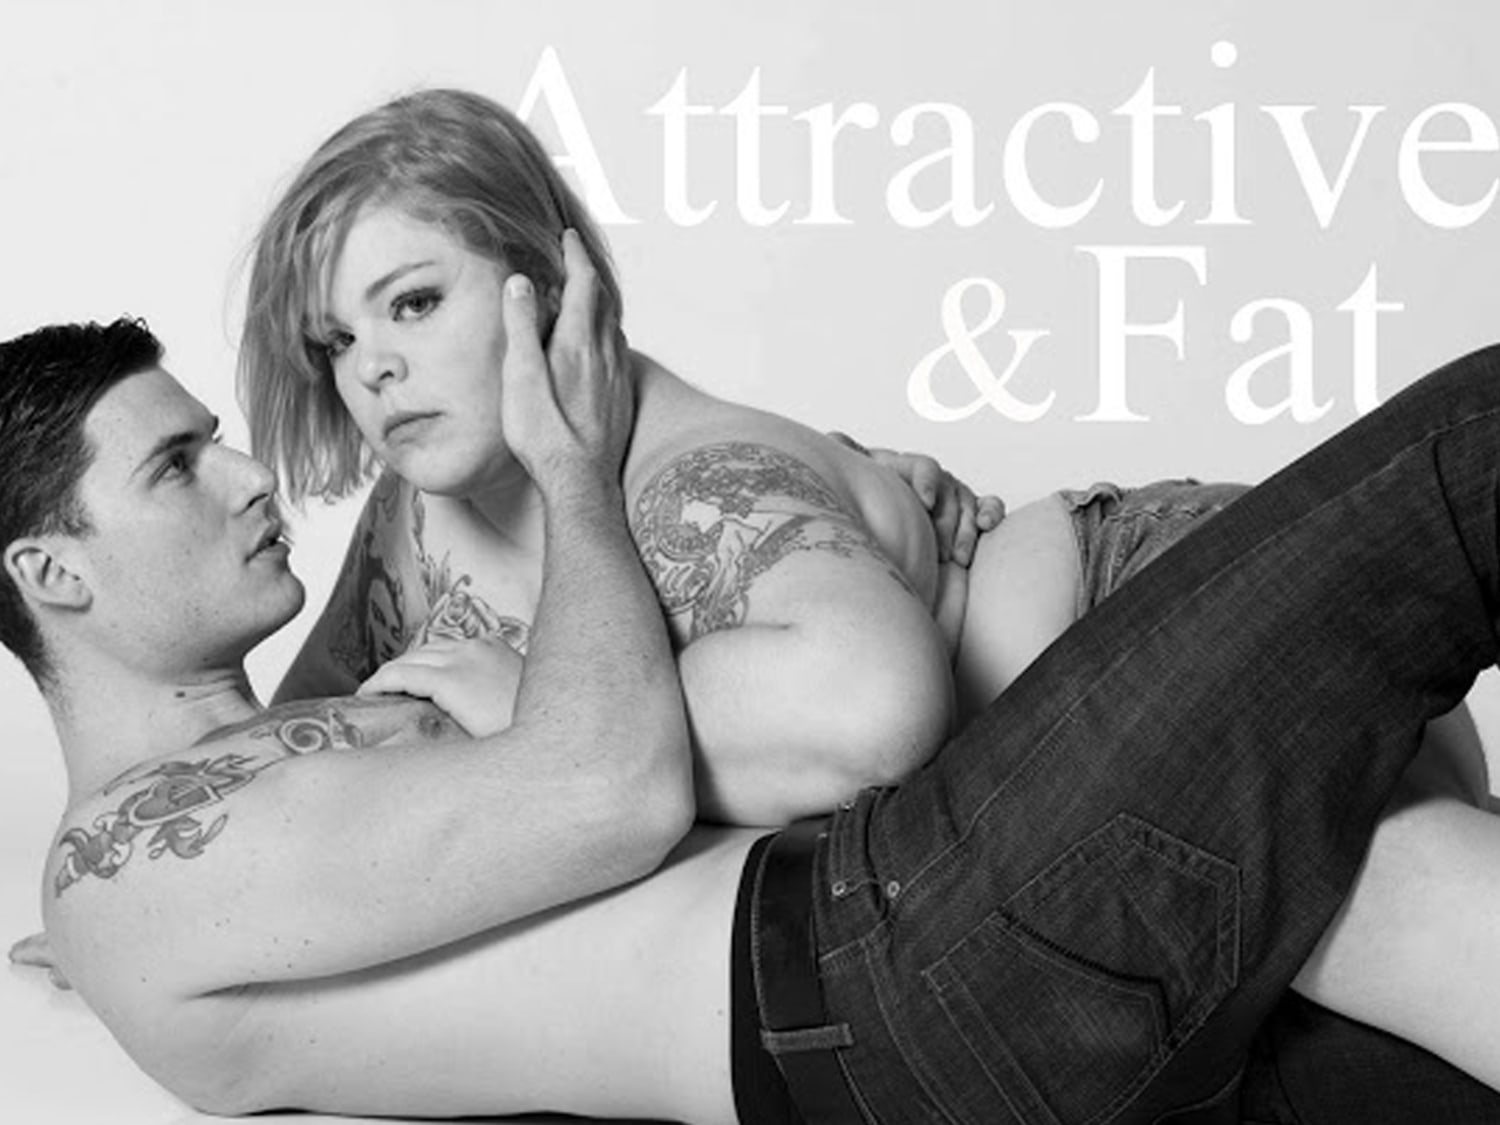 Meena Sex Photos - Blogger to Abercrombie & Fitch: A&F means 'Attractive & Fat'